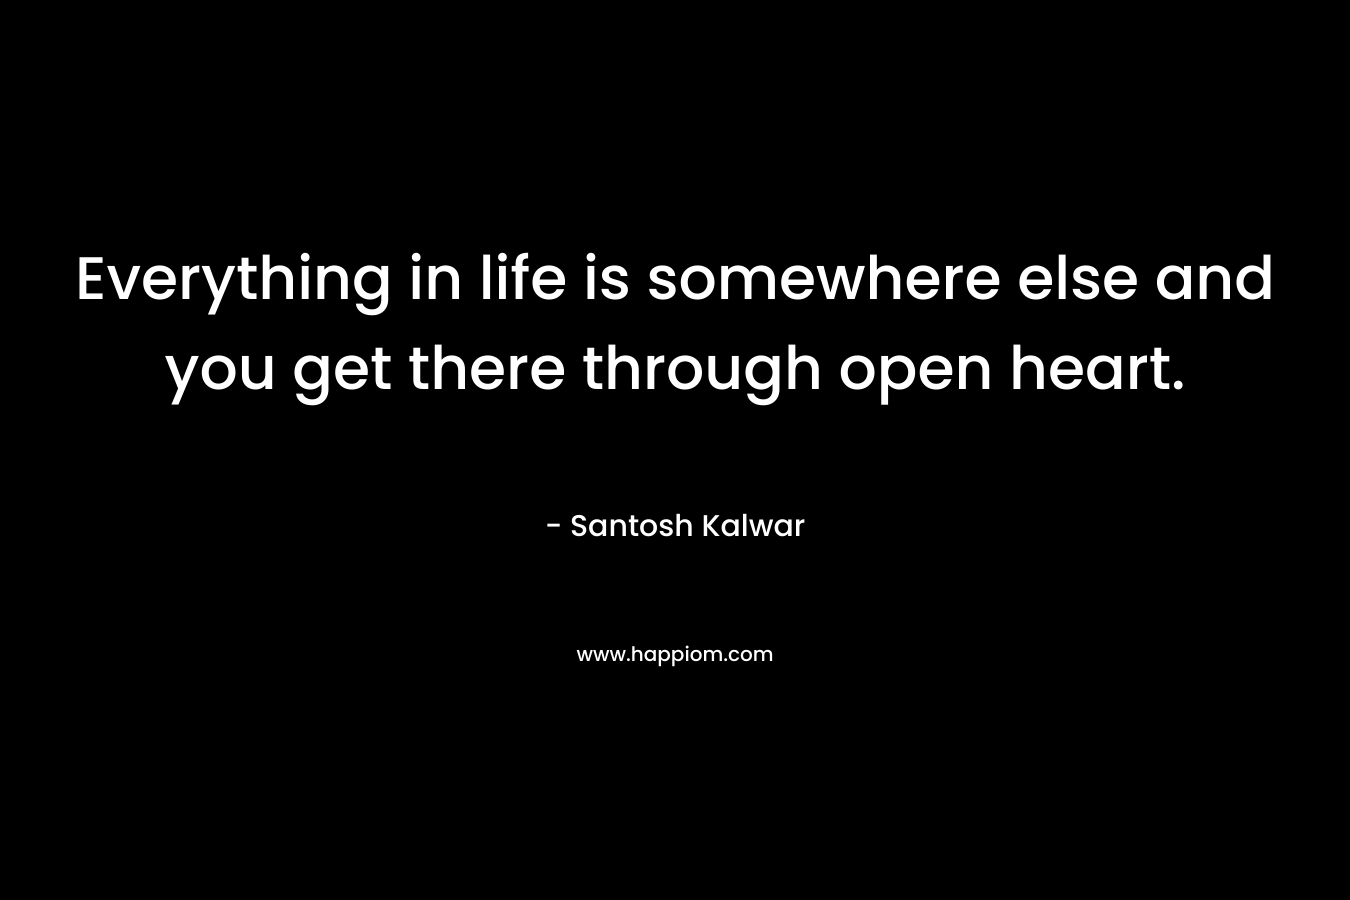 Everything in life is somewhere else and you get there through open heart.